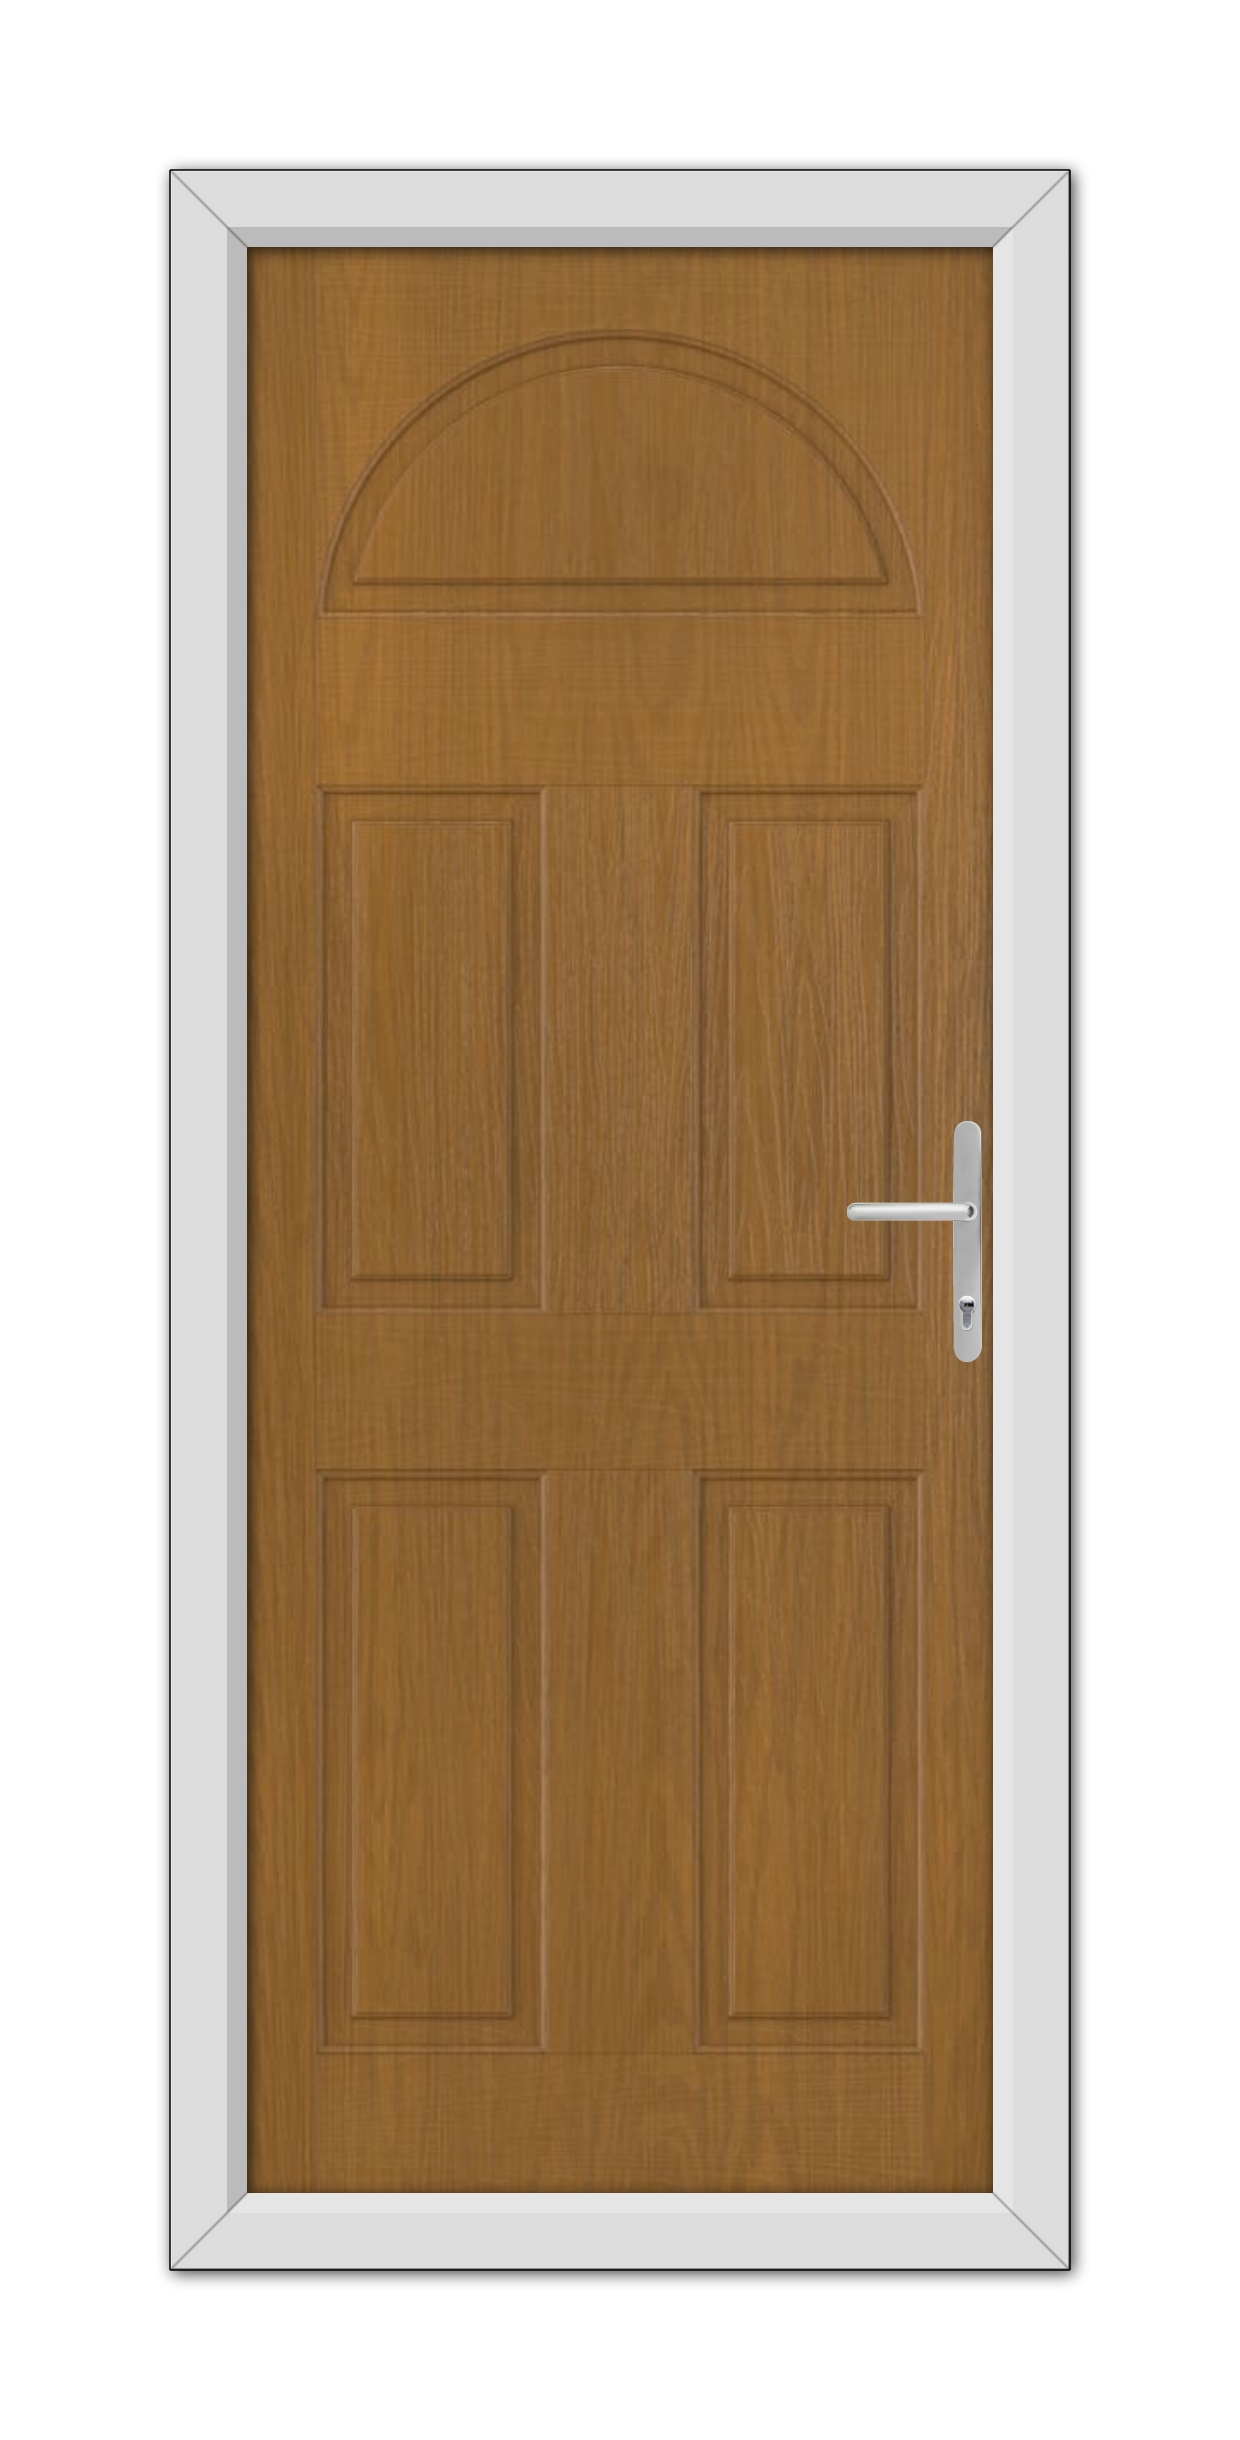 A Oak Middleton Solid Stable Composite Door 48mm Timber Core with six panels and an arch design at the top, featuring a modern handle, set within a white frame.